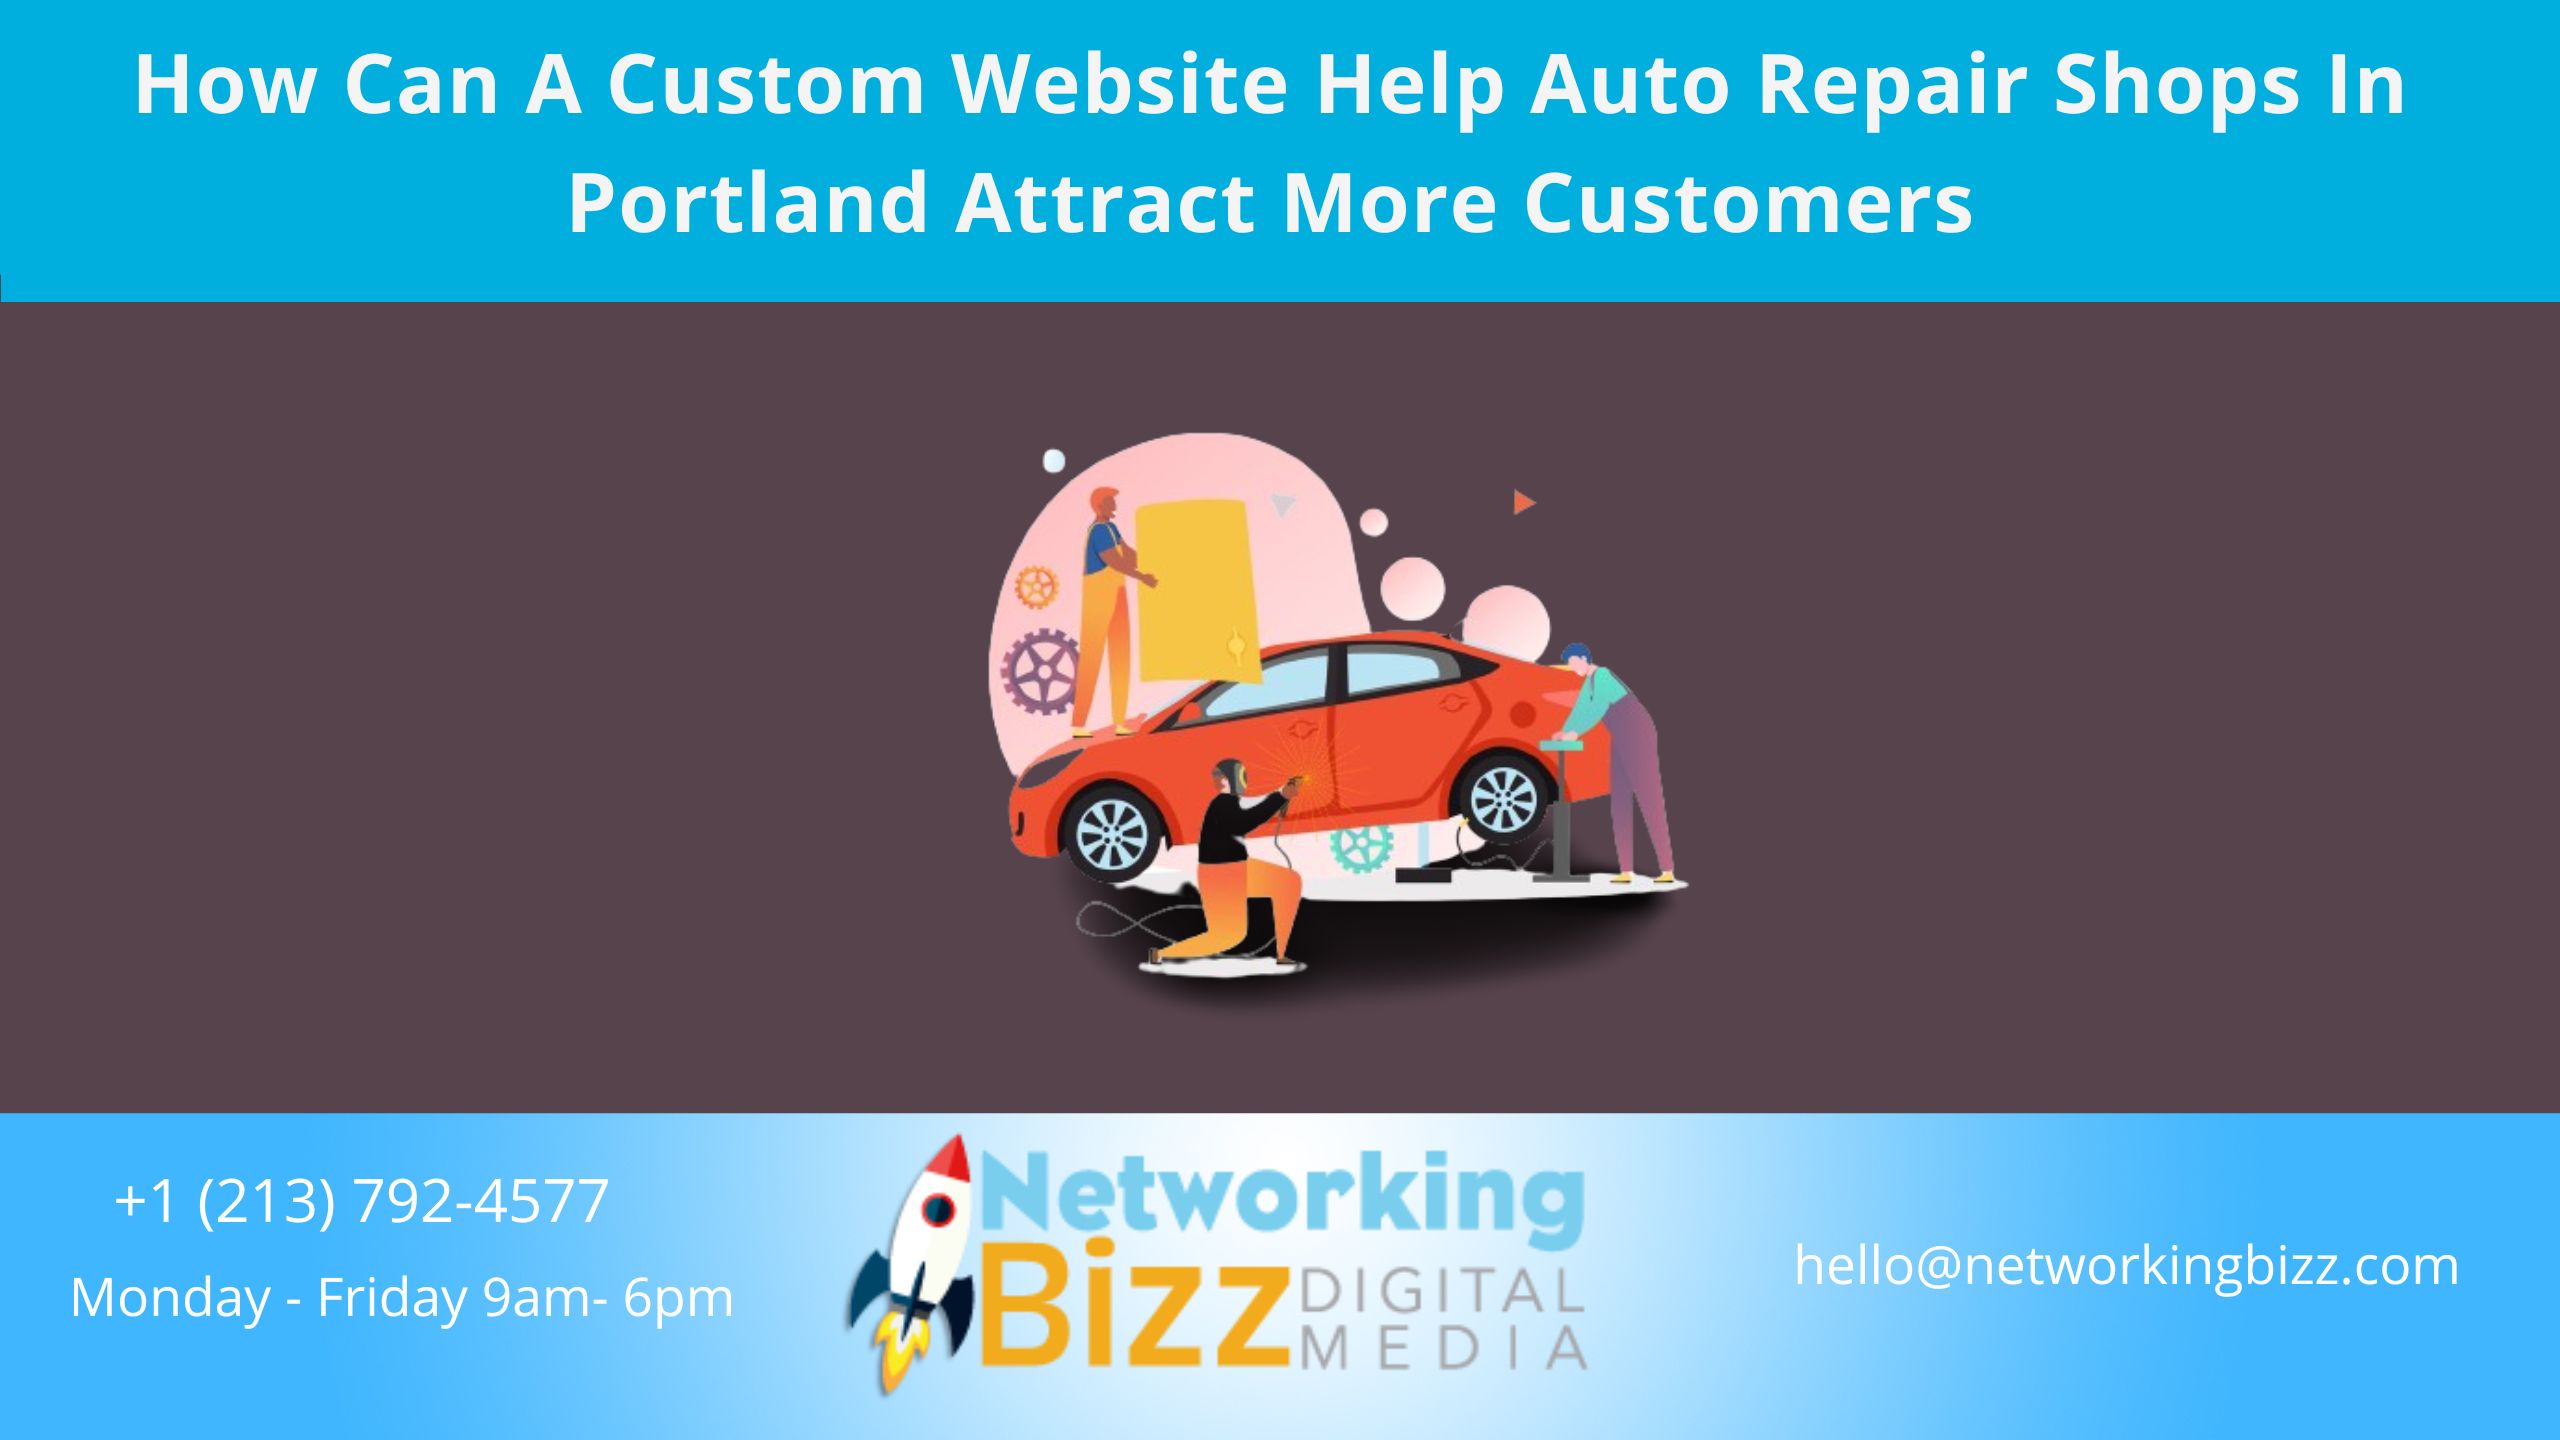 How Can A Custom Website Help Auto Repair Shops In Portland Attract More Customers